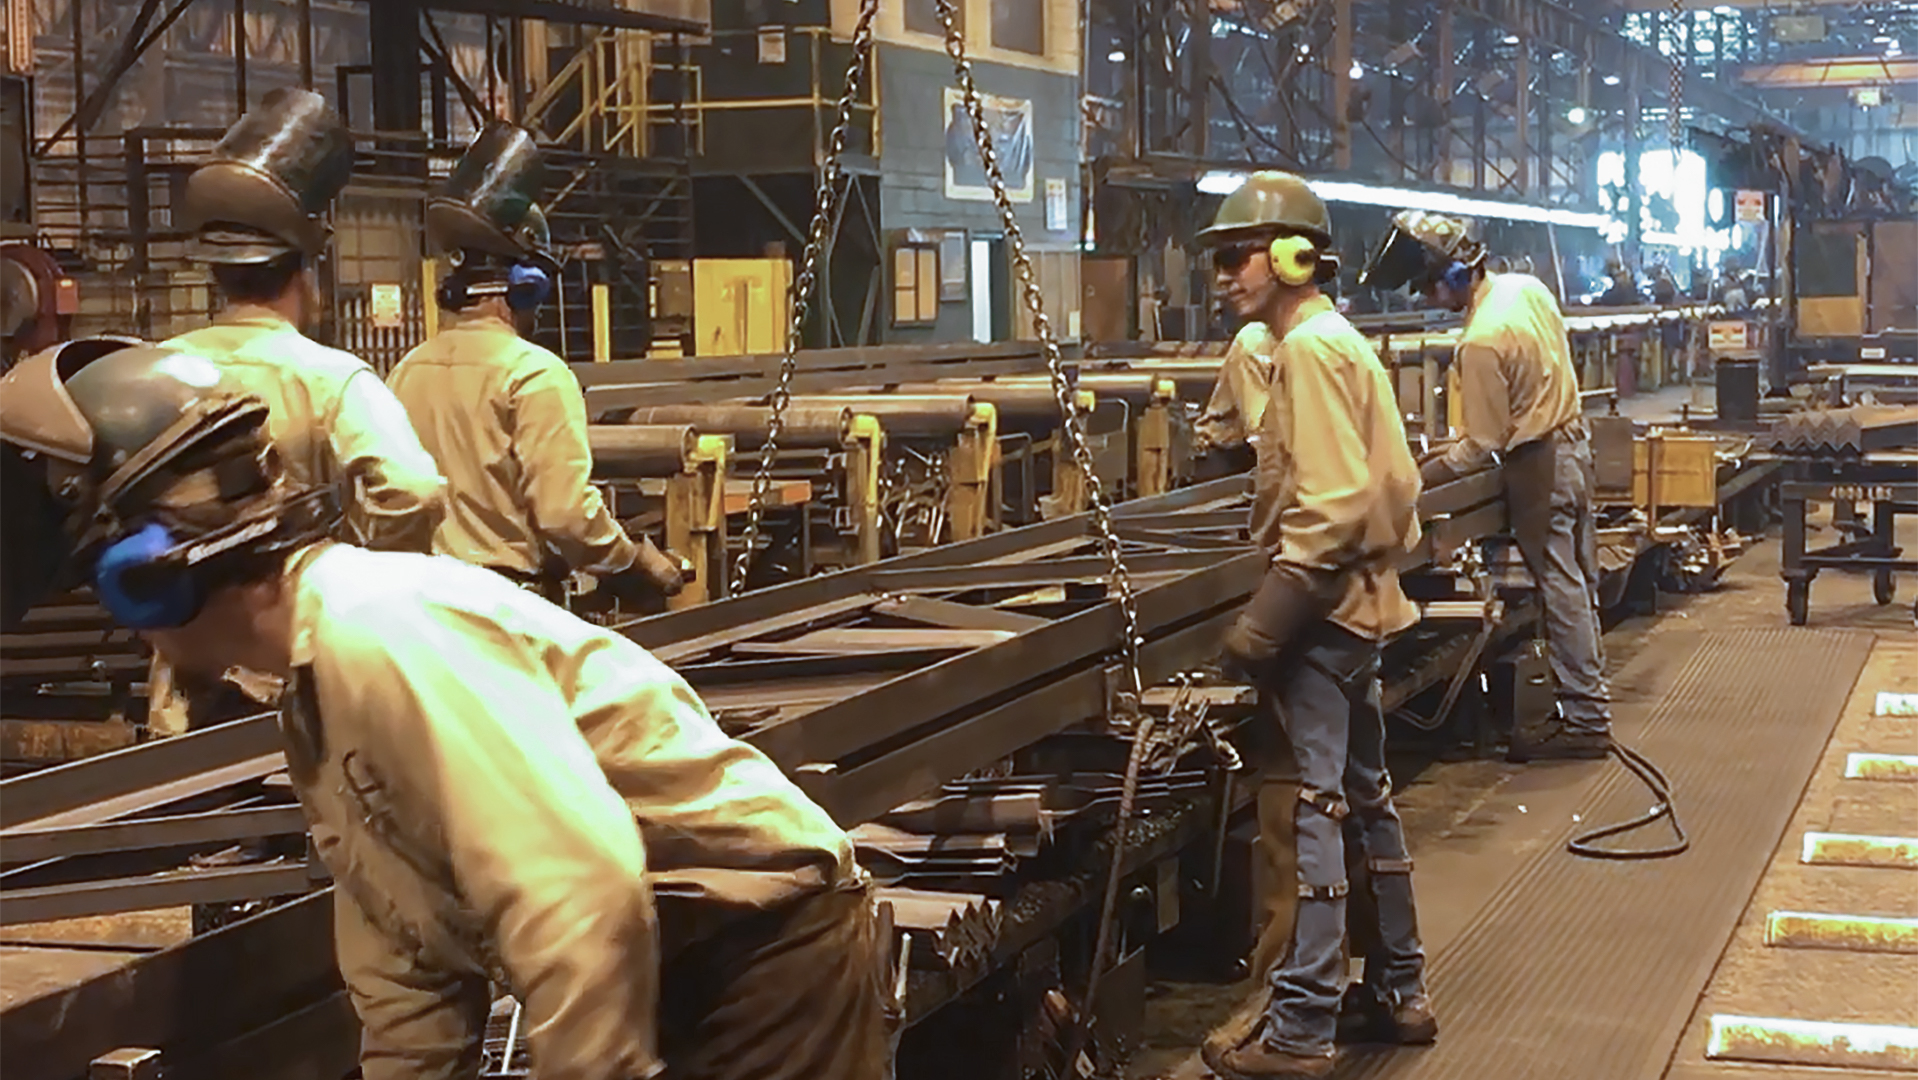 Steel fabrication workers use wireless headsets to communicate at social distances.